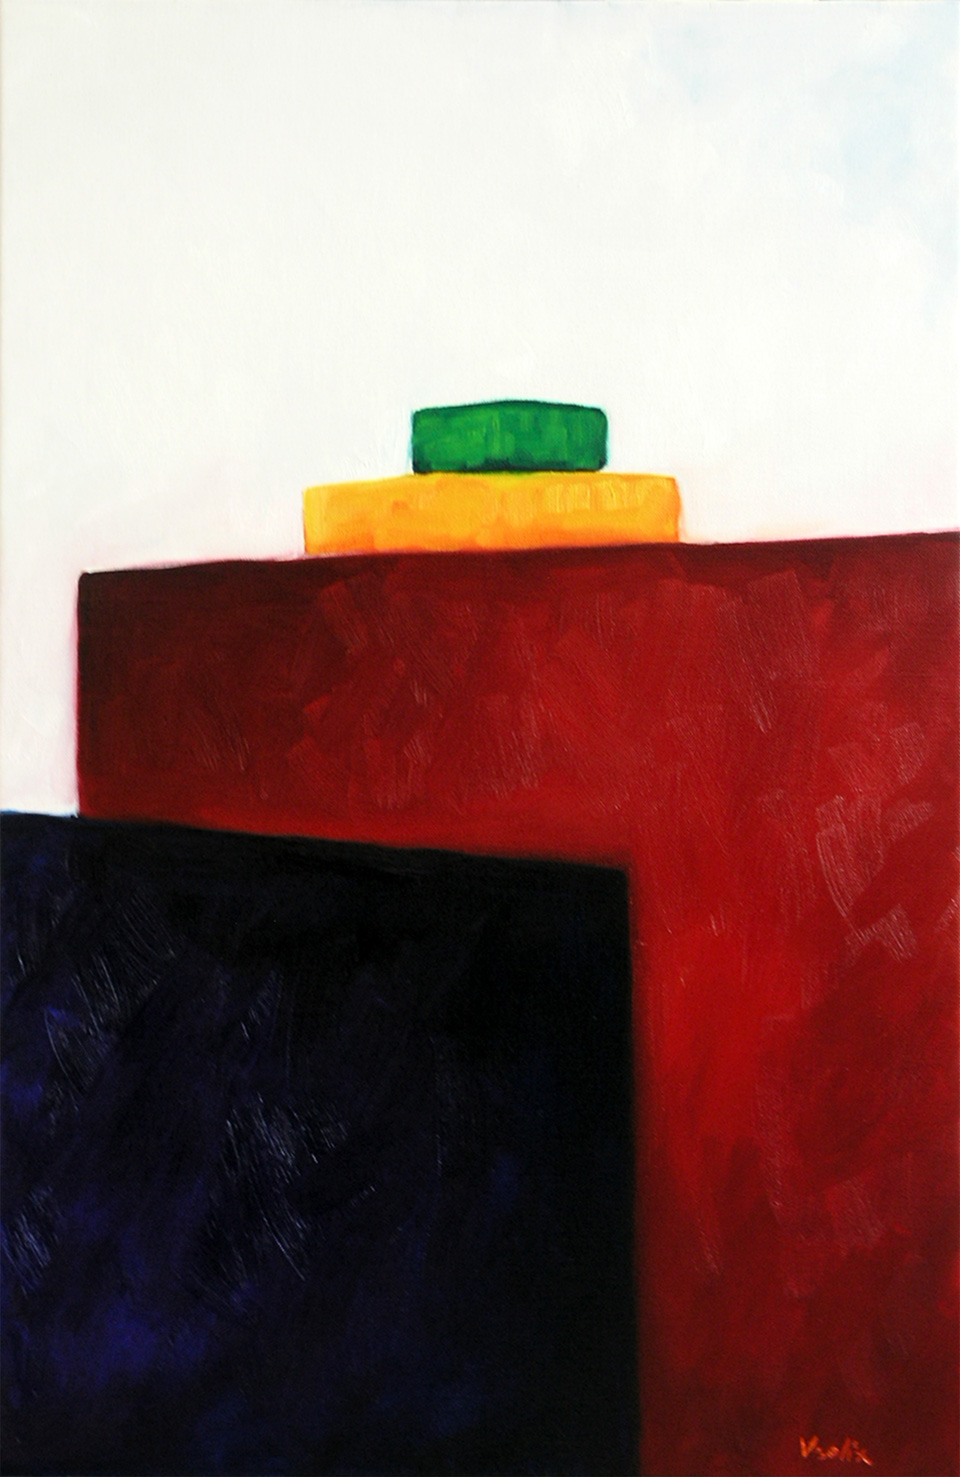 Green Box, a painting by Guido Vrolix